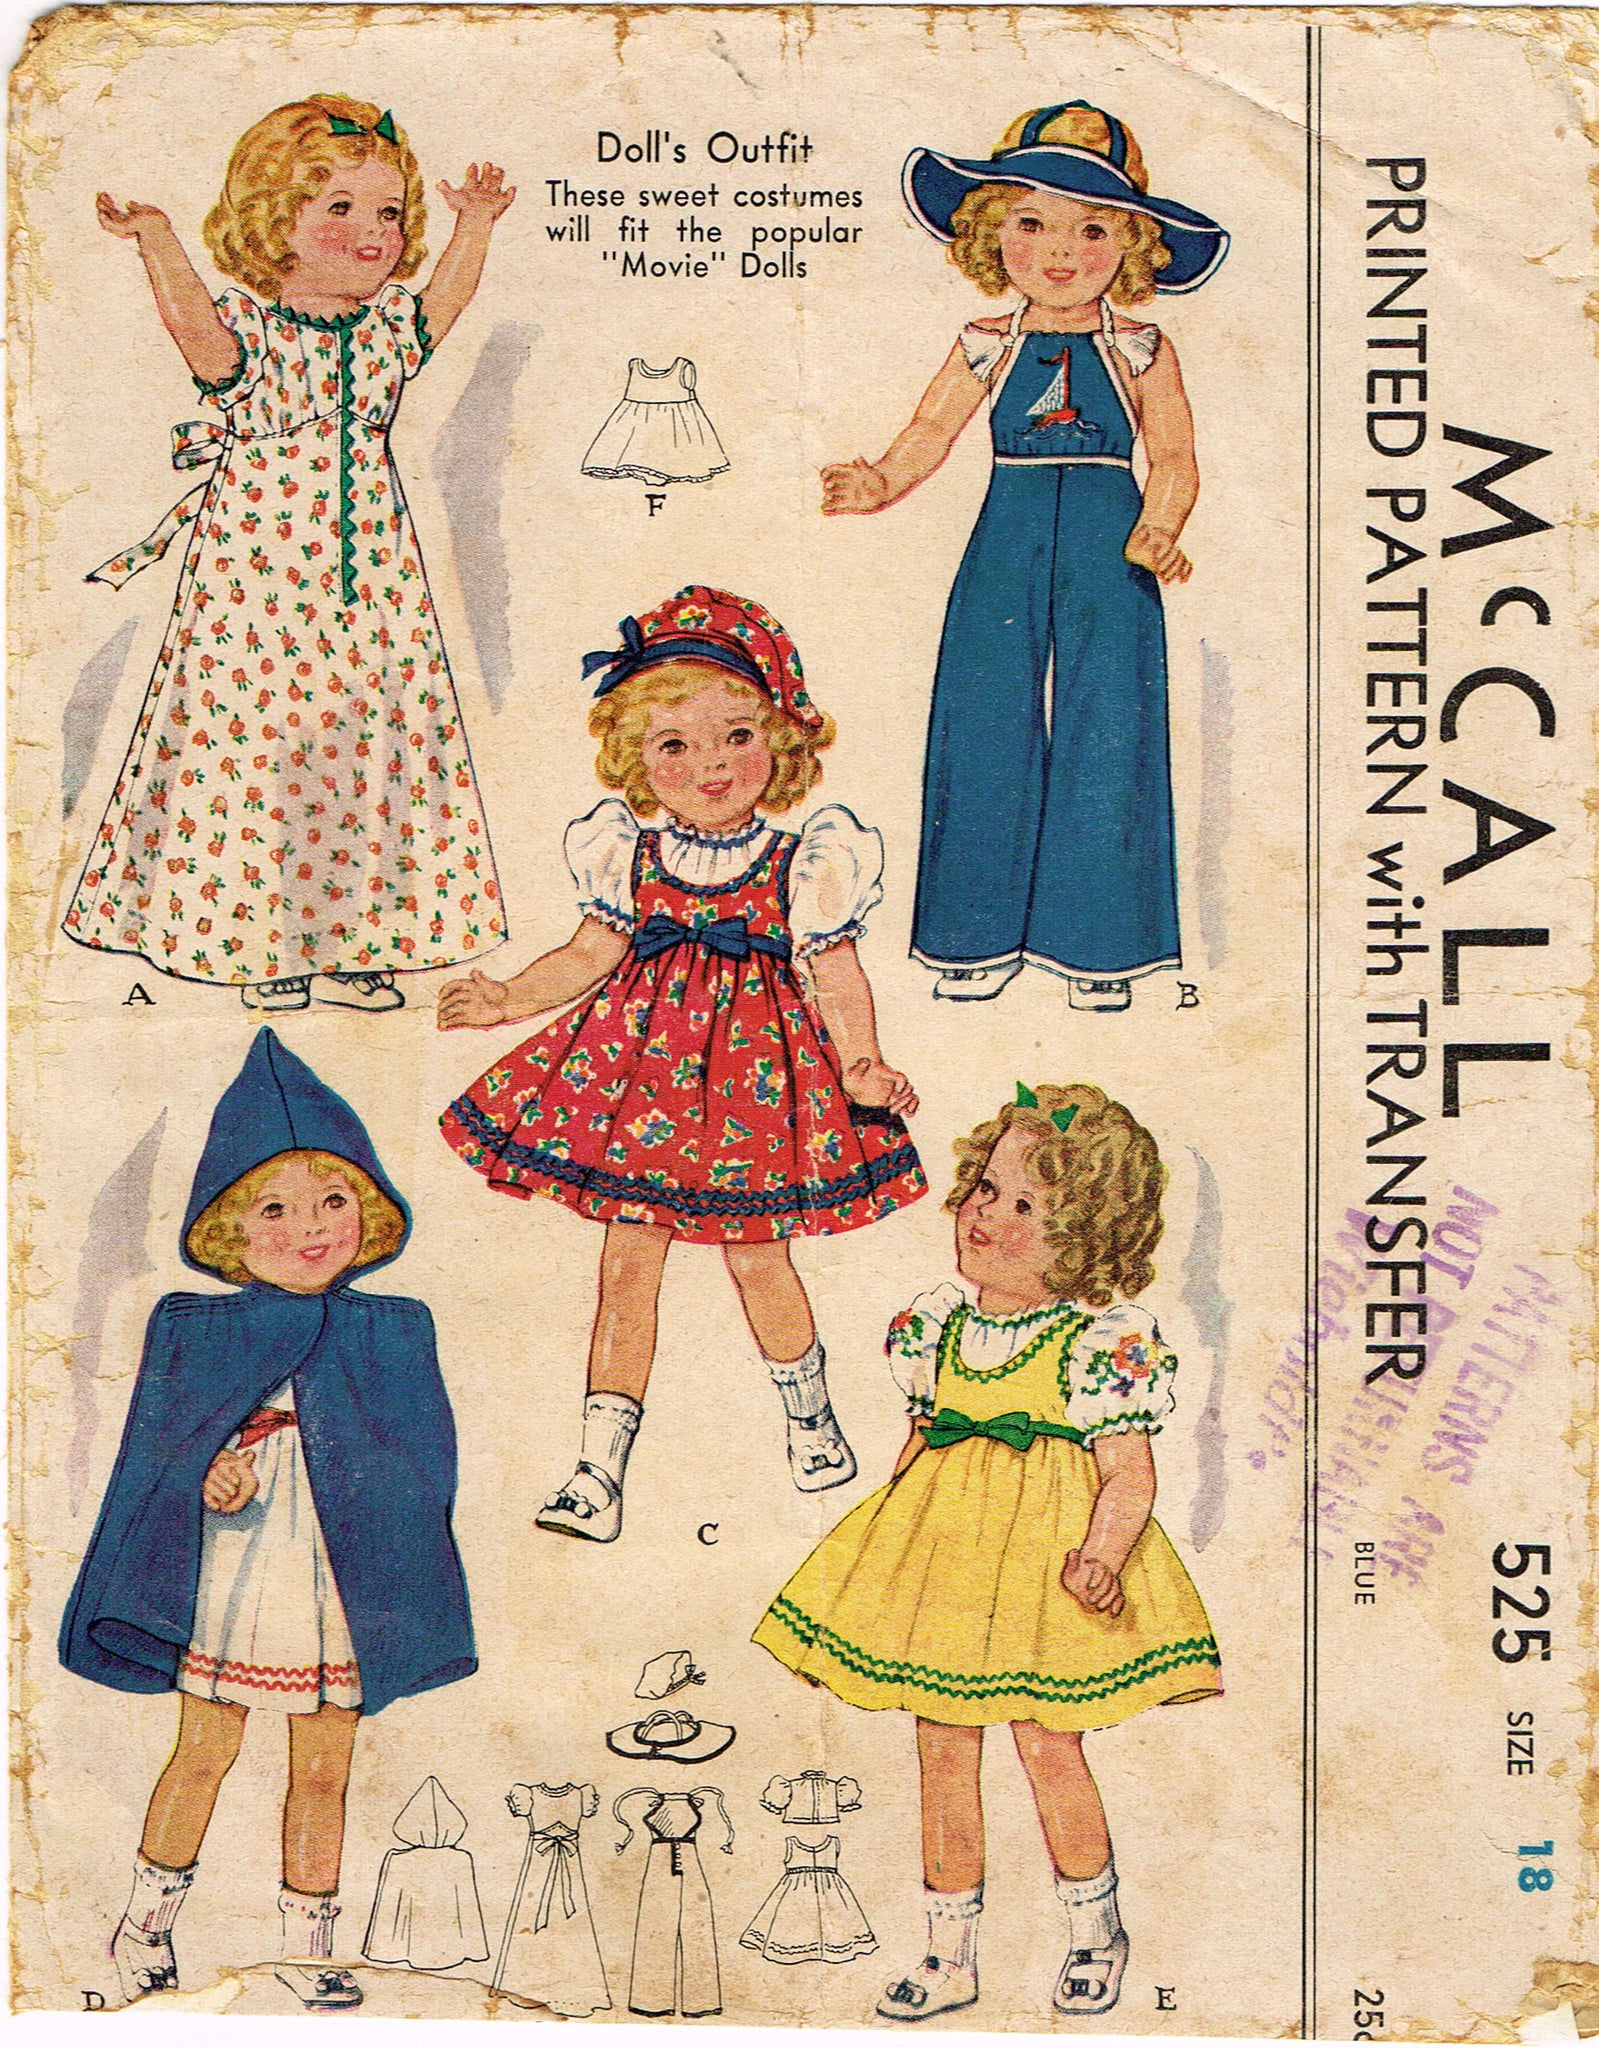 33 Sewing Patterns for 18” Doll Clothes (11 FREE PDFs!)